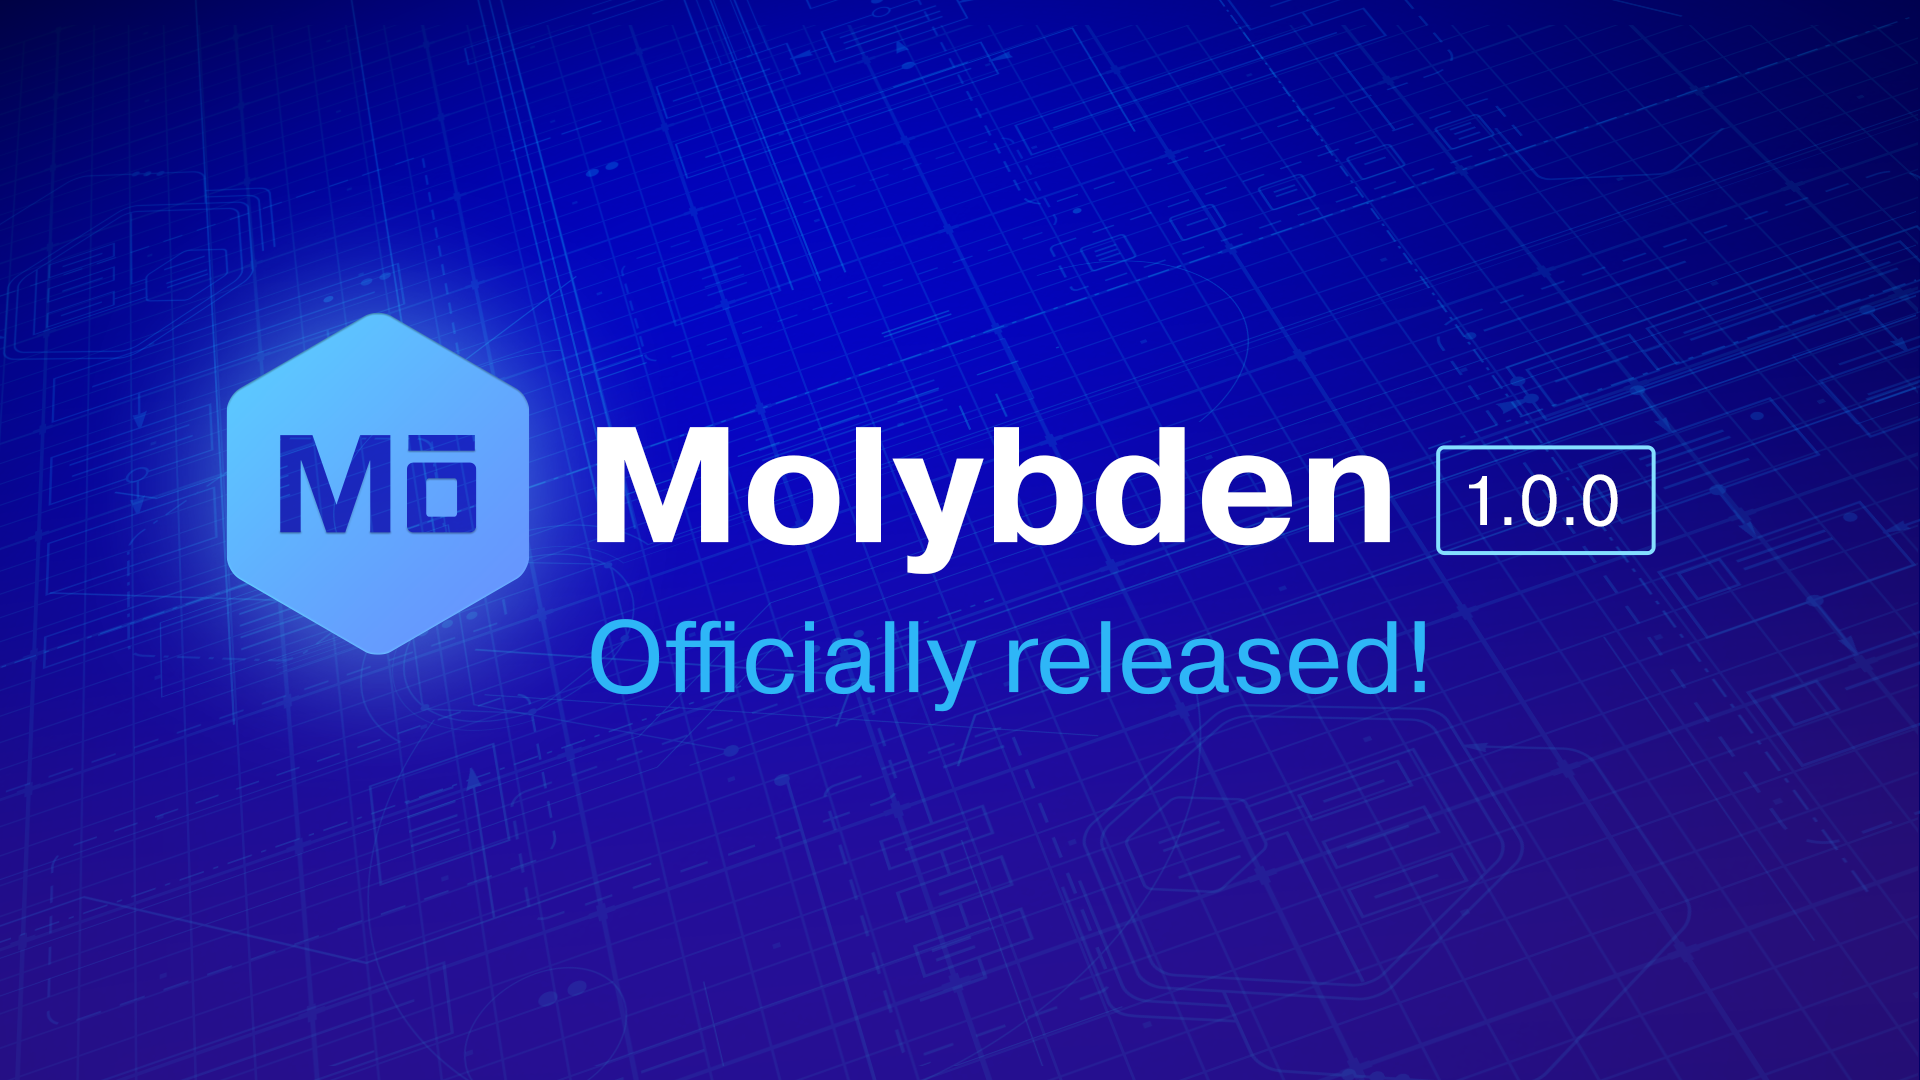 Molybden 1.0.0 is officially released